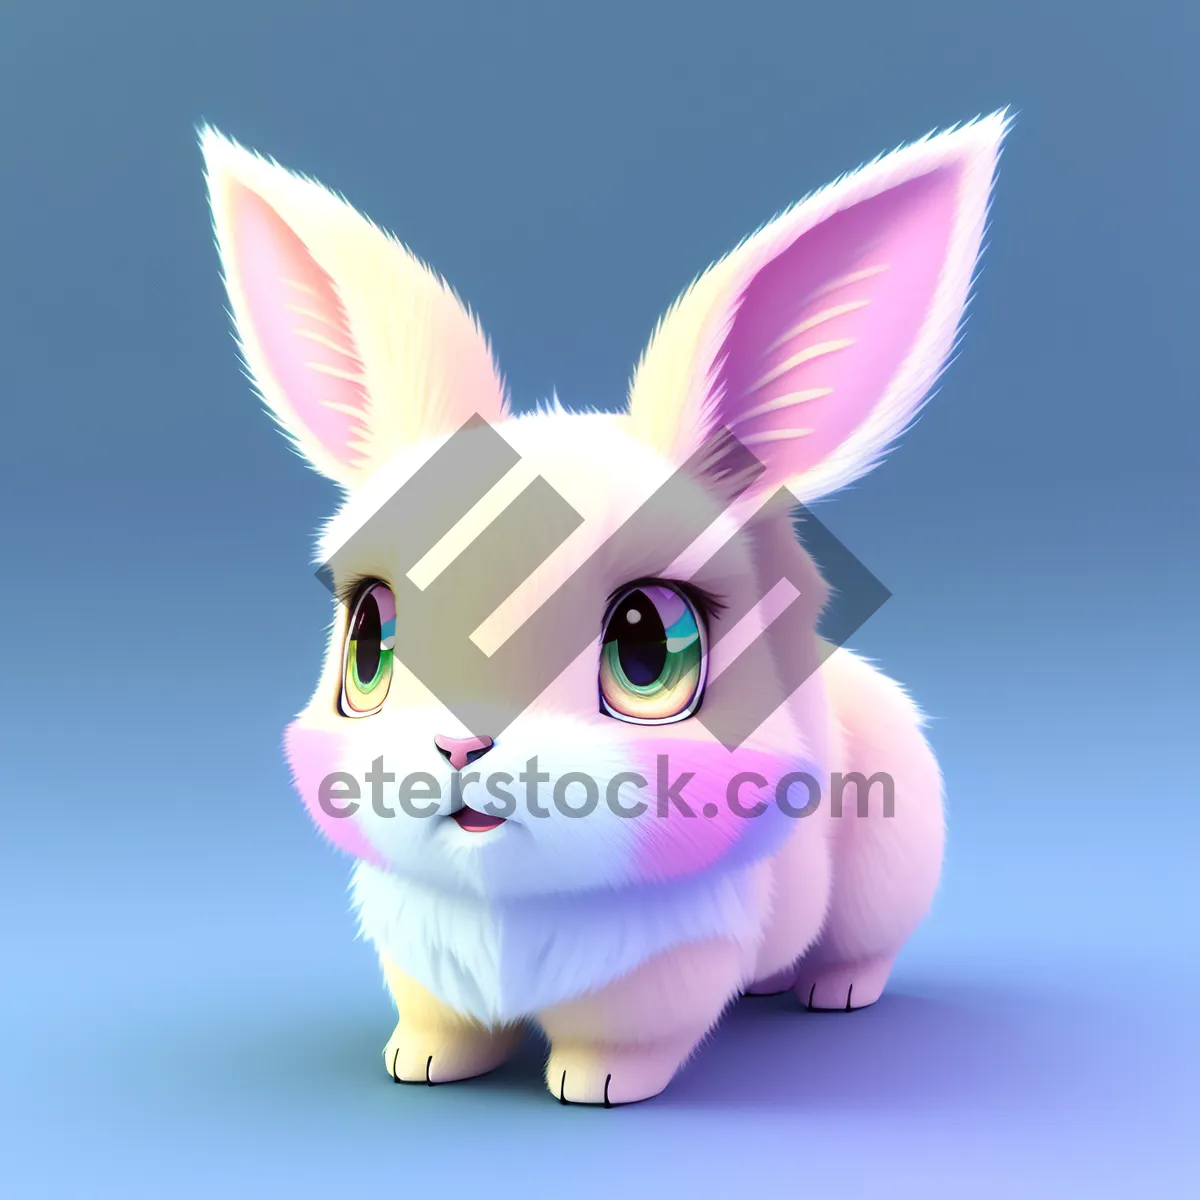 Picture of Cute Bunny Piggy Bank Cartoon Image for Savings